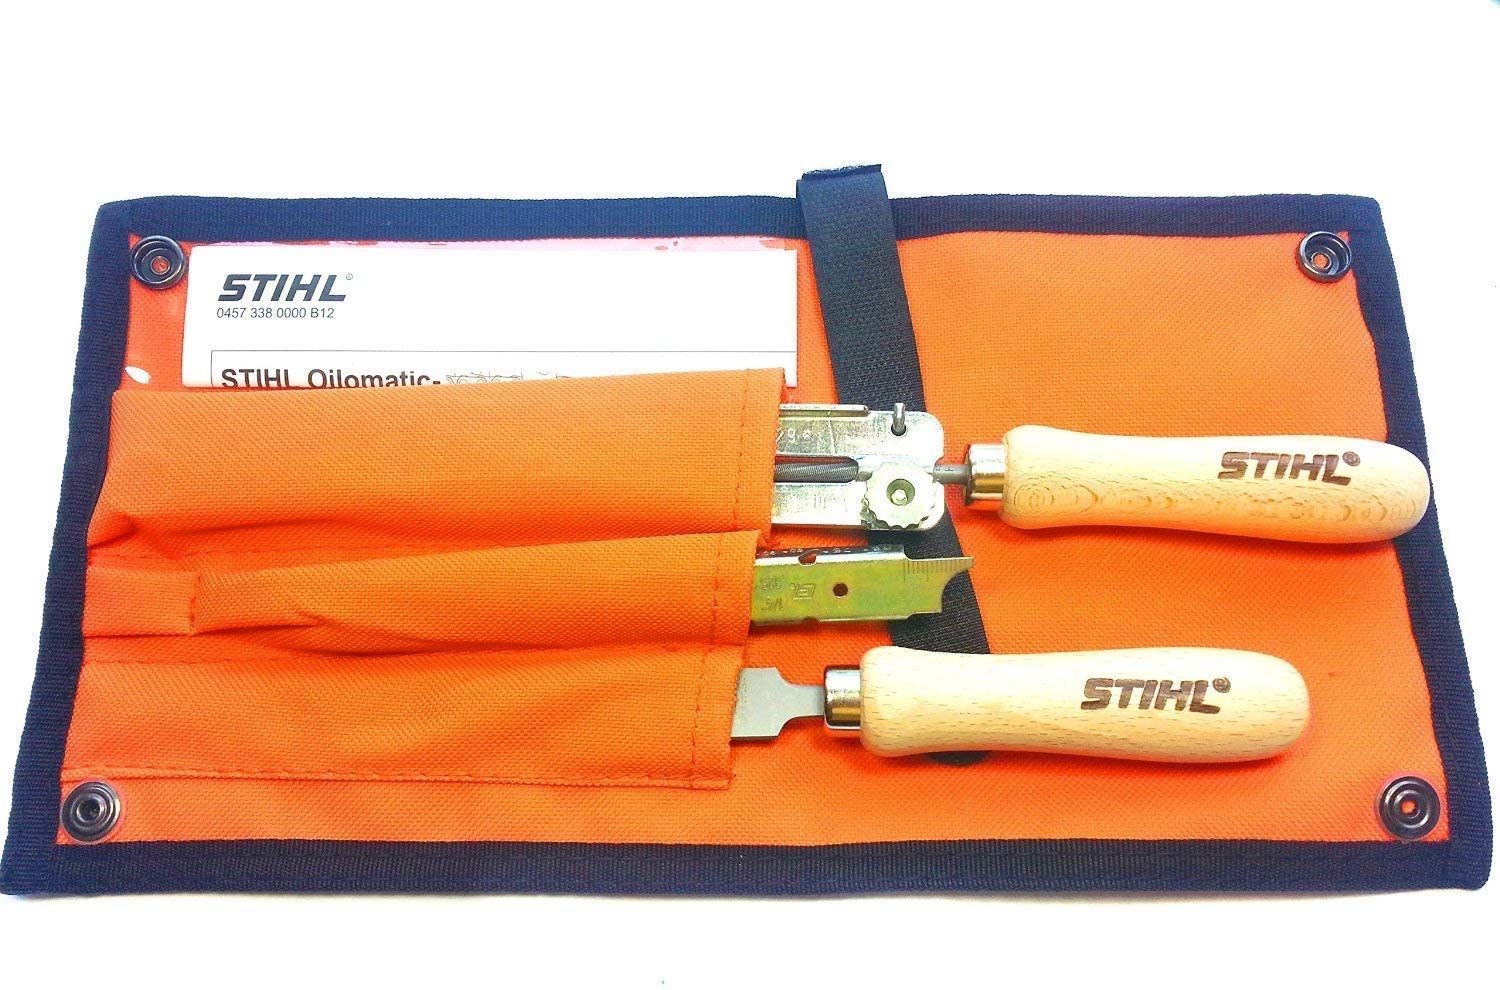 STIHL 5605 007 1030 Complete Saw Chain Filing Kit For .404-Inch, 7/32-Inch